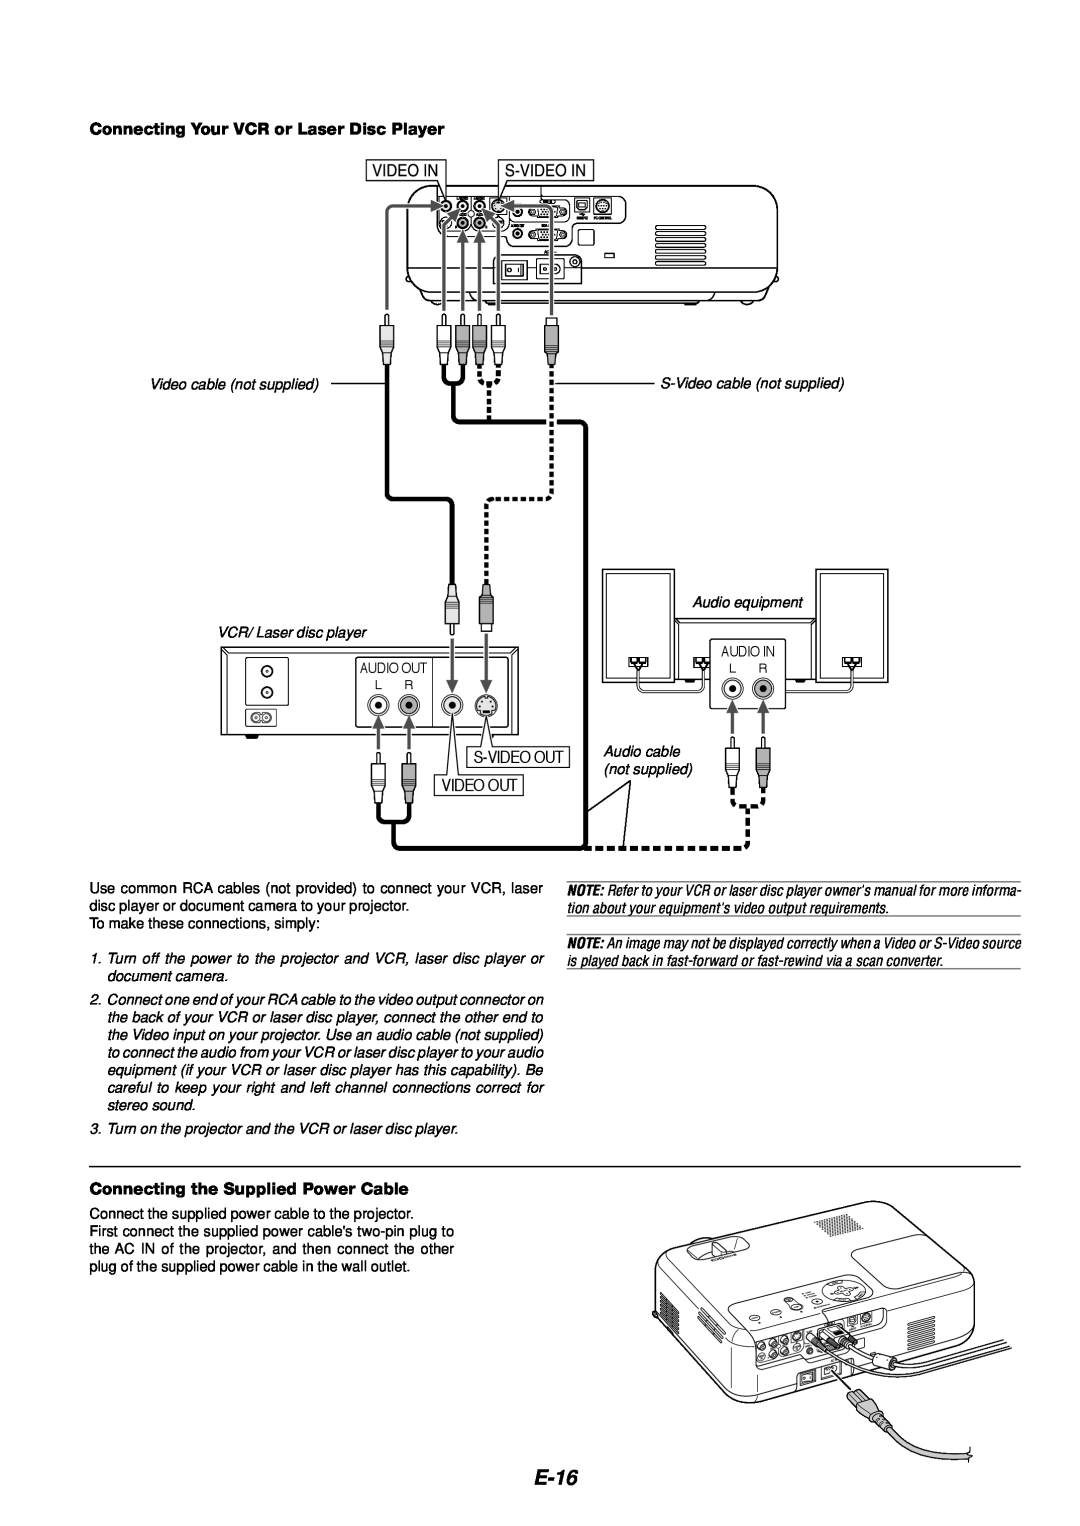 Dukane 8766 manual E-16, Connecting Your VCR or Laser Disc Player, Connecting the Supplied Power Cable 